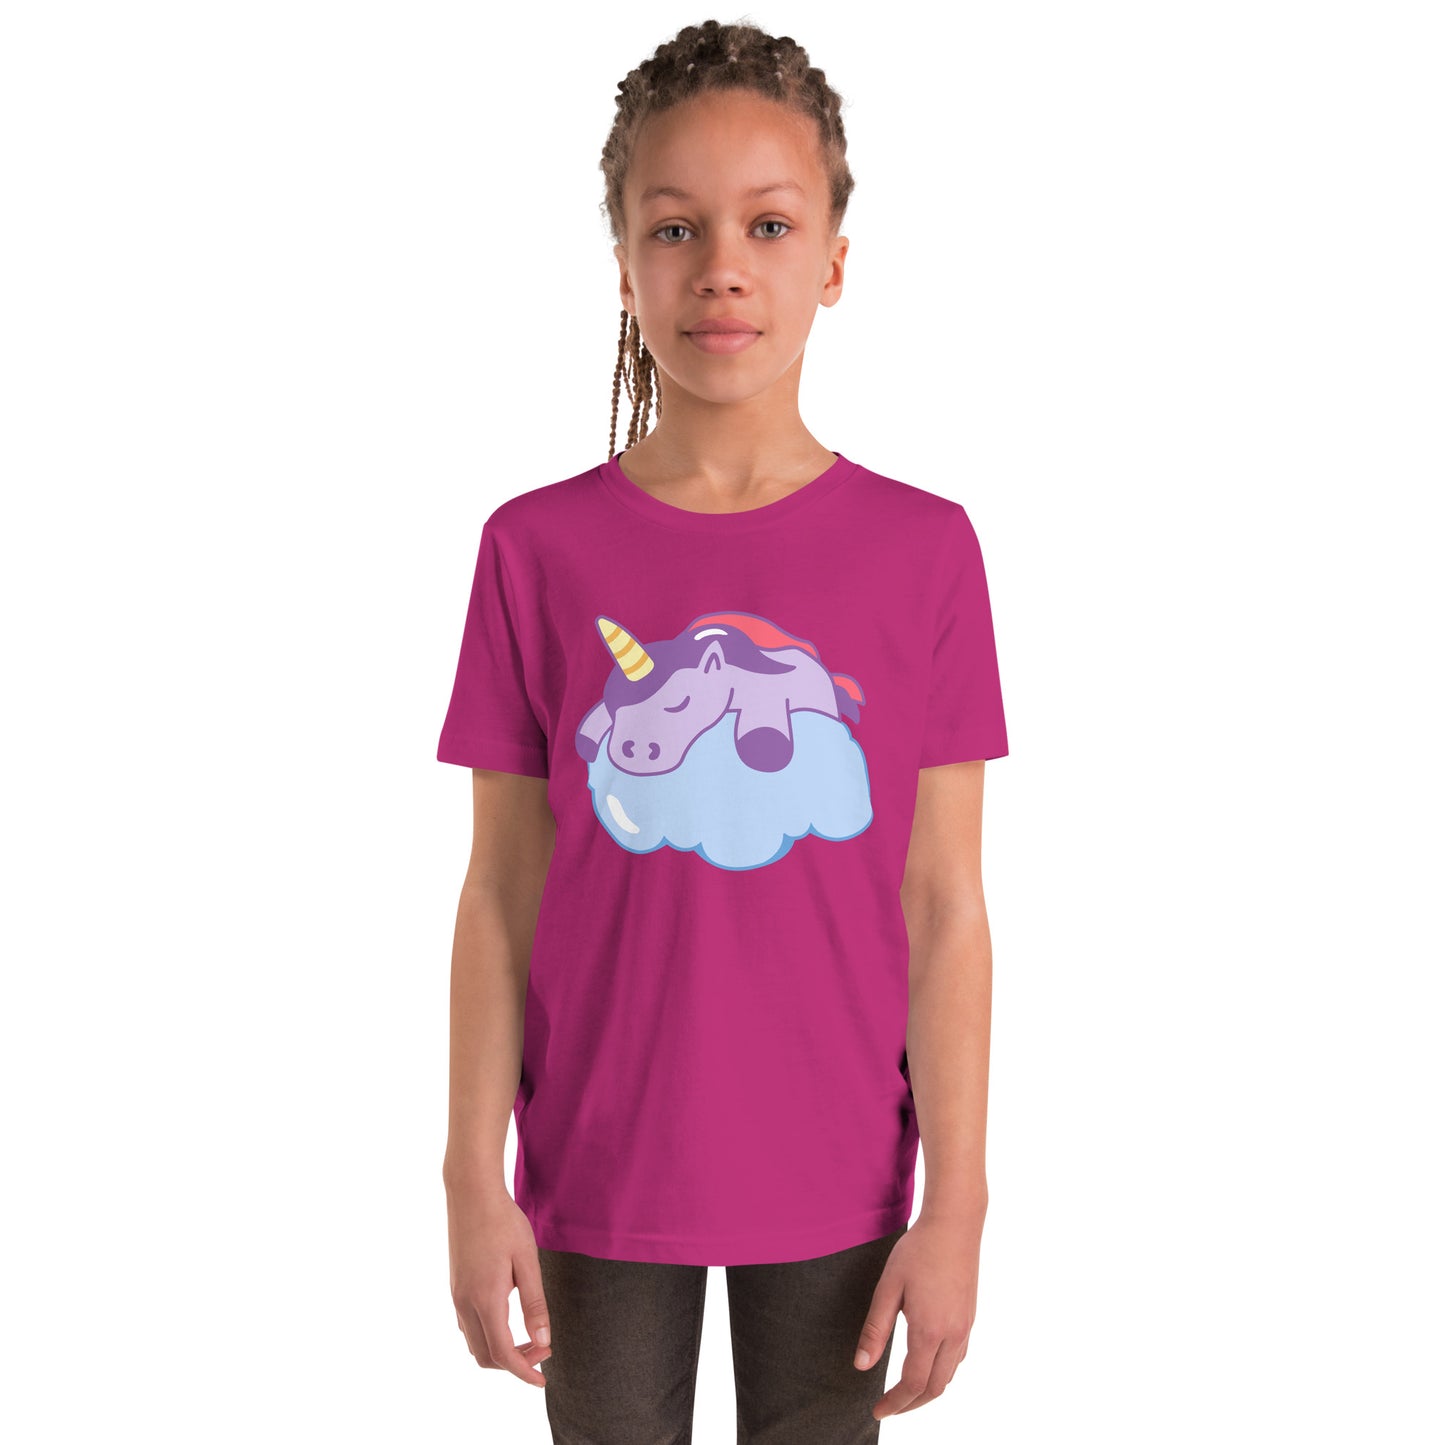 Youth with a berry T-shirt with a print of a sleeping unicorn on a cloud